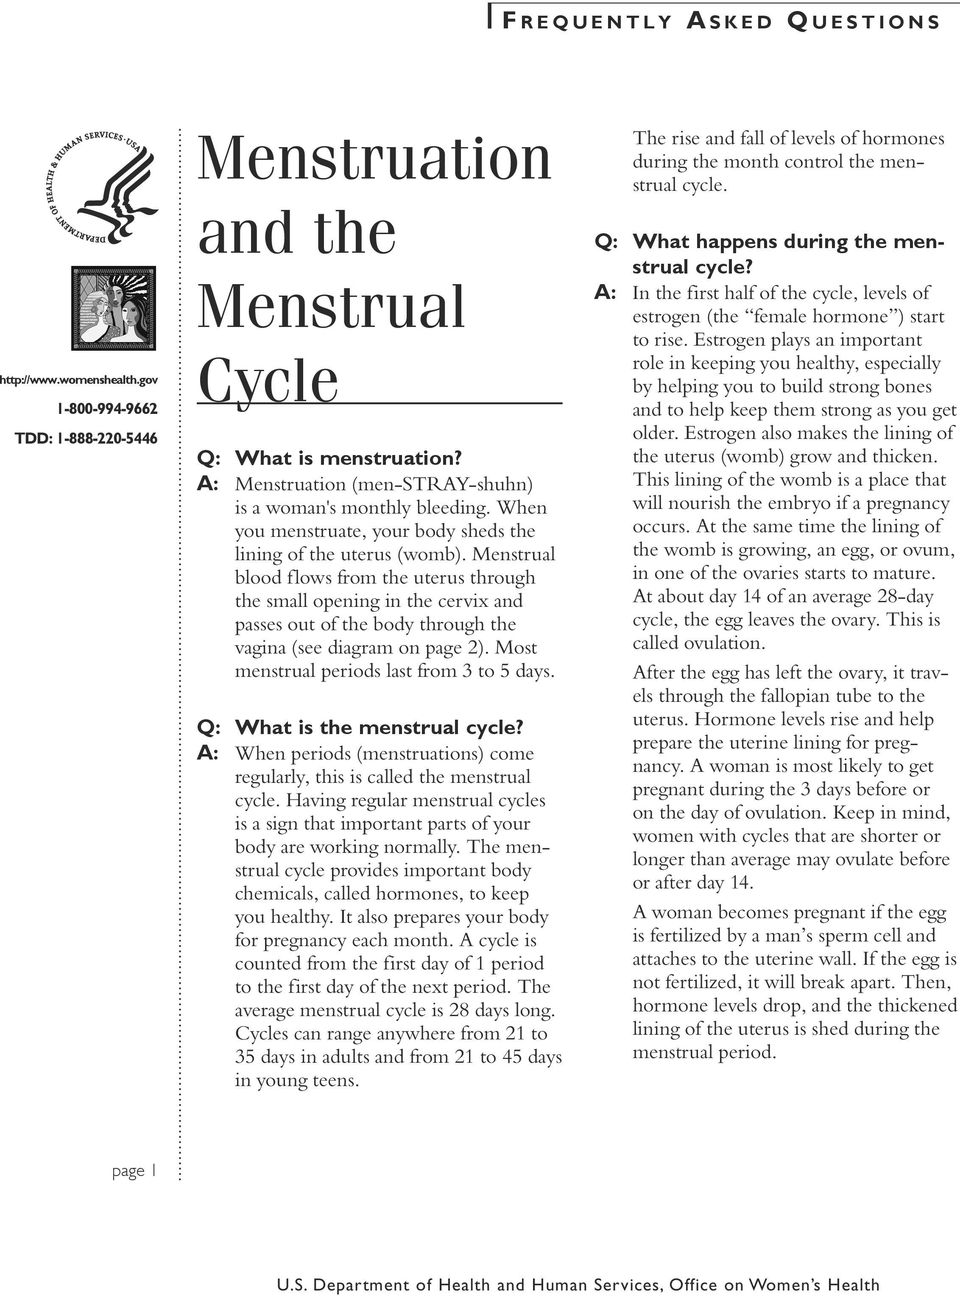 Q: What is the menstrual cycle? A: When periods (menstruations) come regularly, this is called the menstrual cycle.